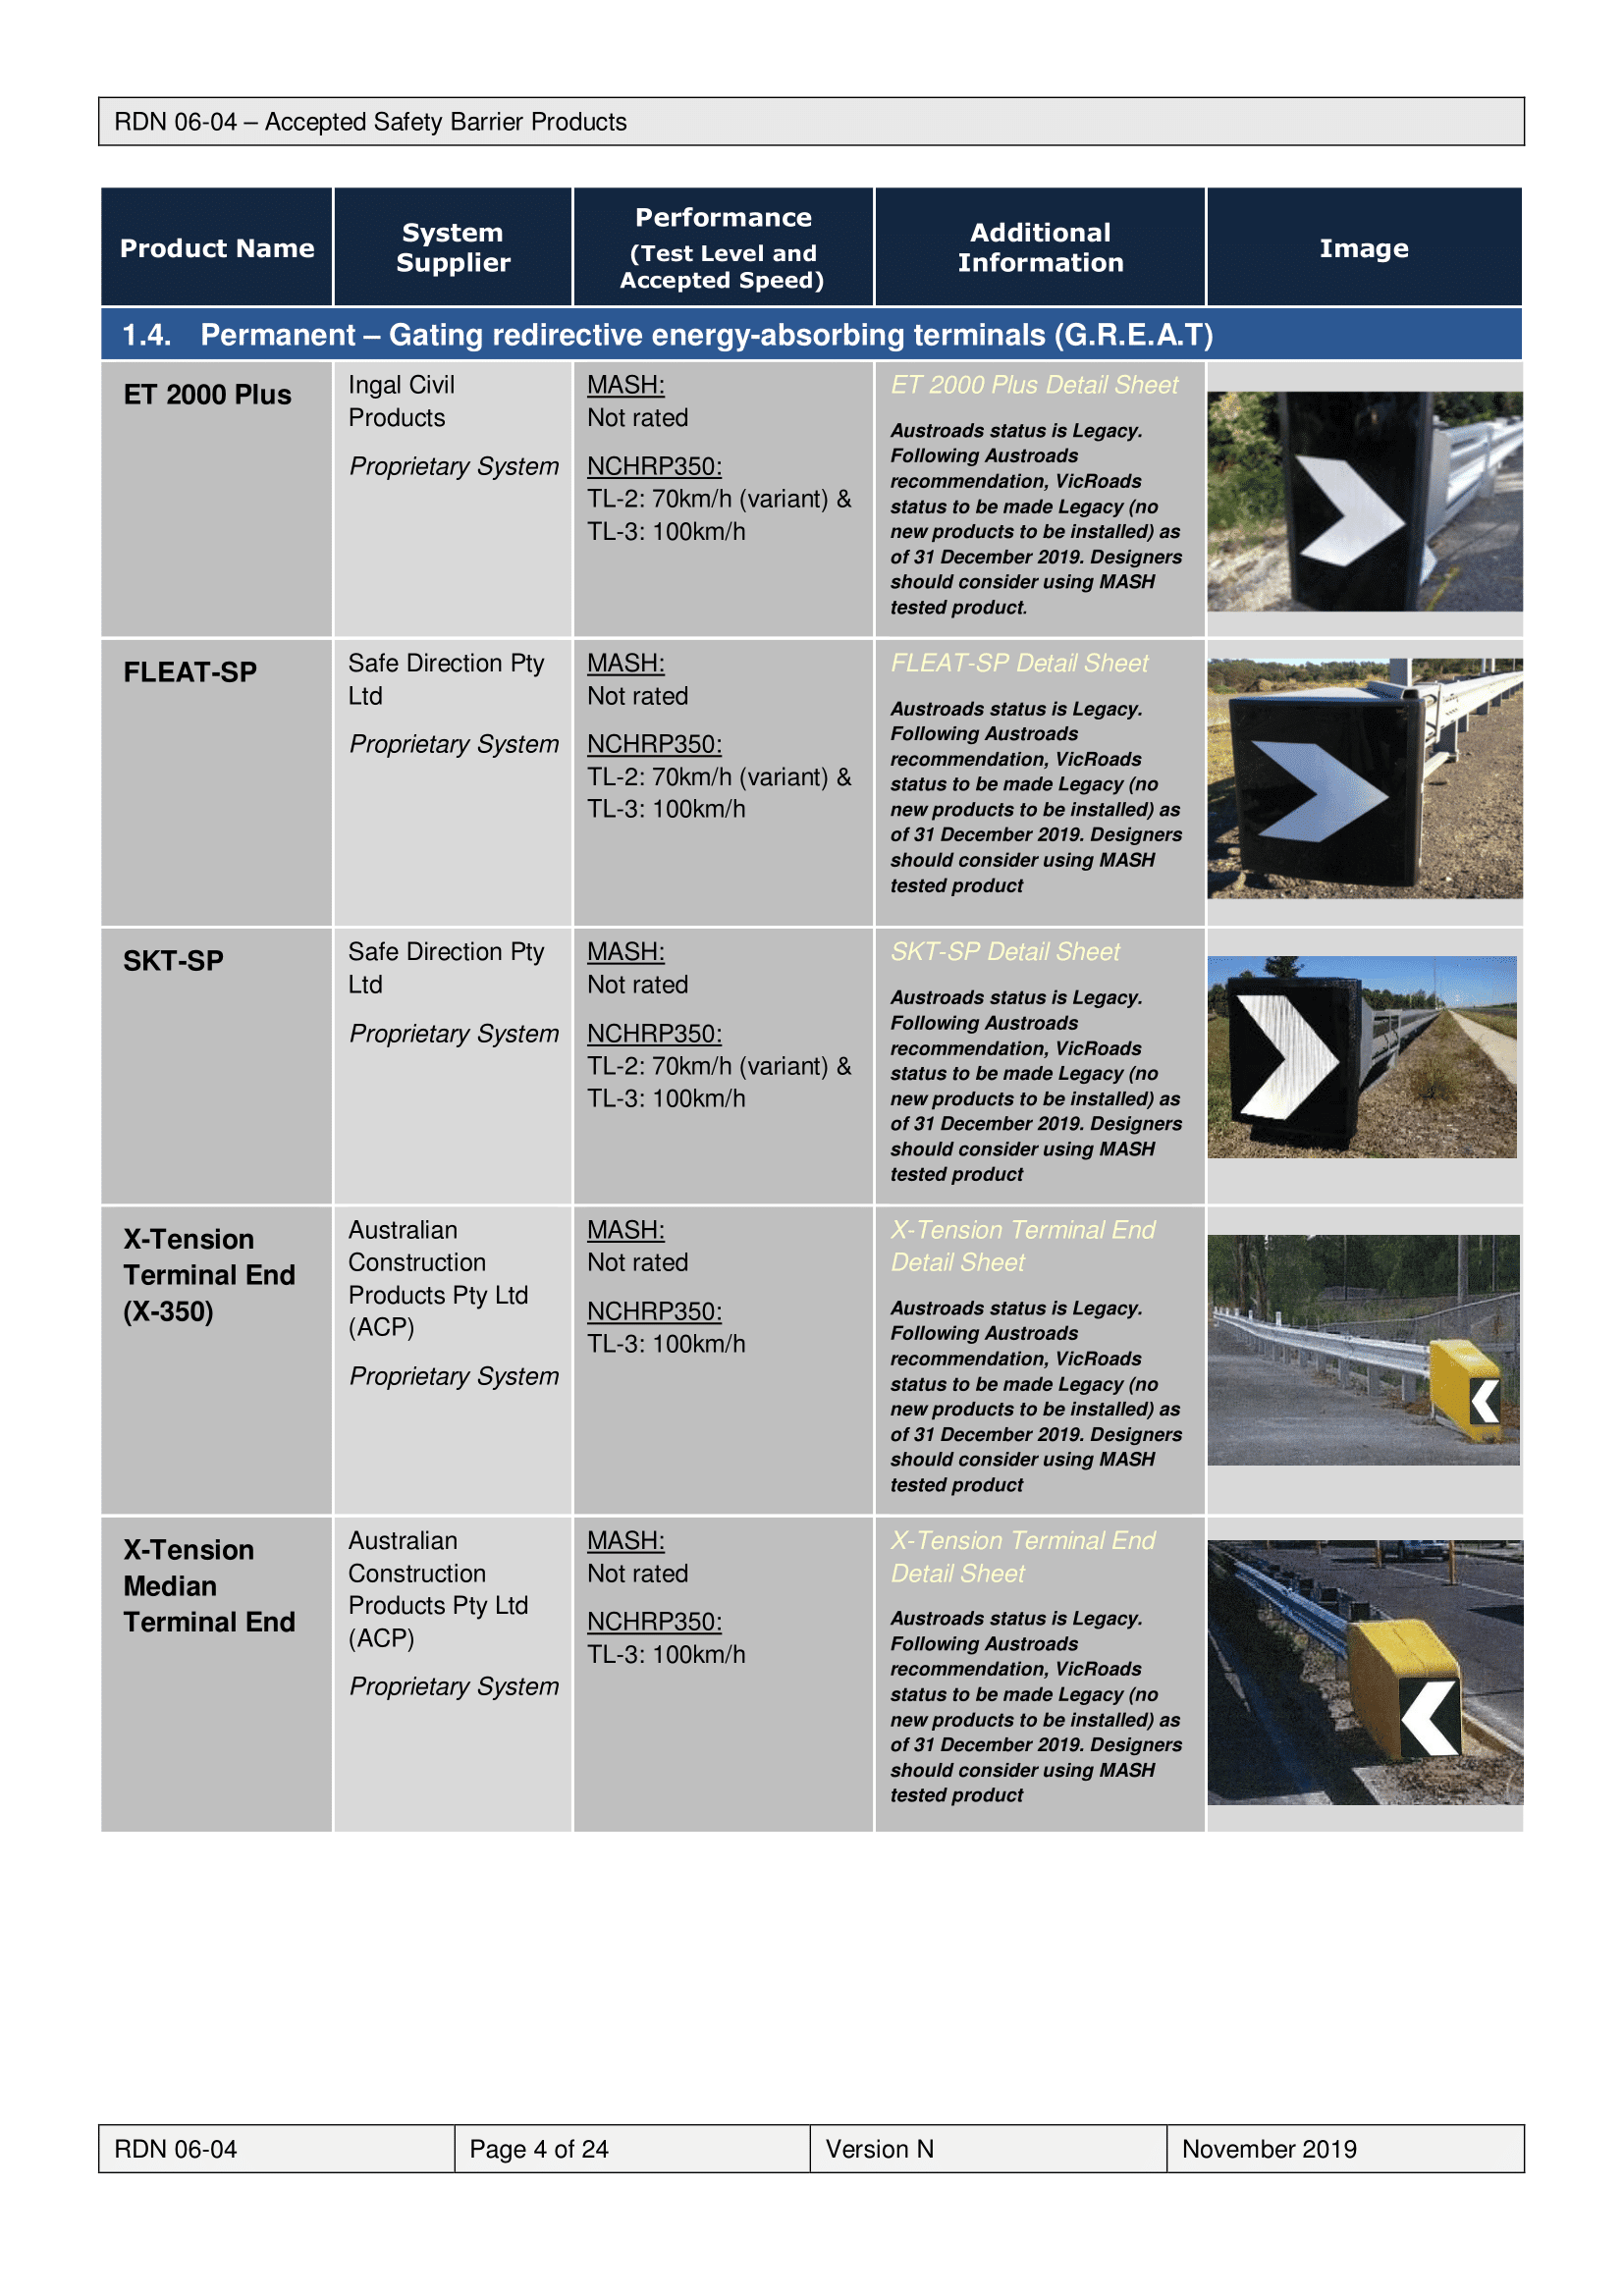 Road Design Note 0604 N Accepted Safety Barrier Products 11 2019-04